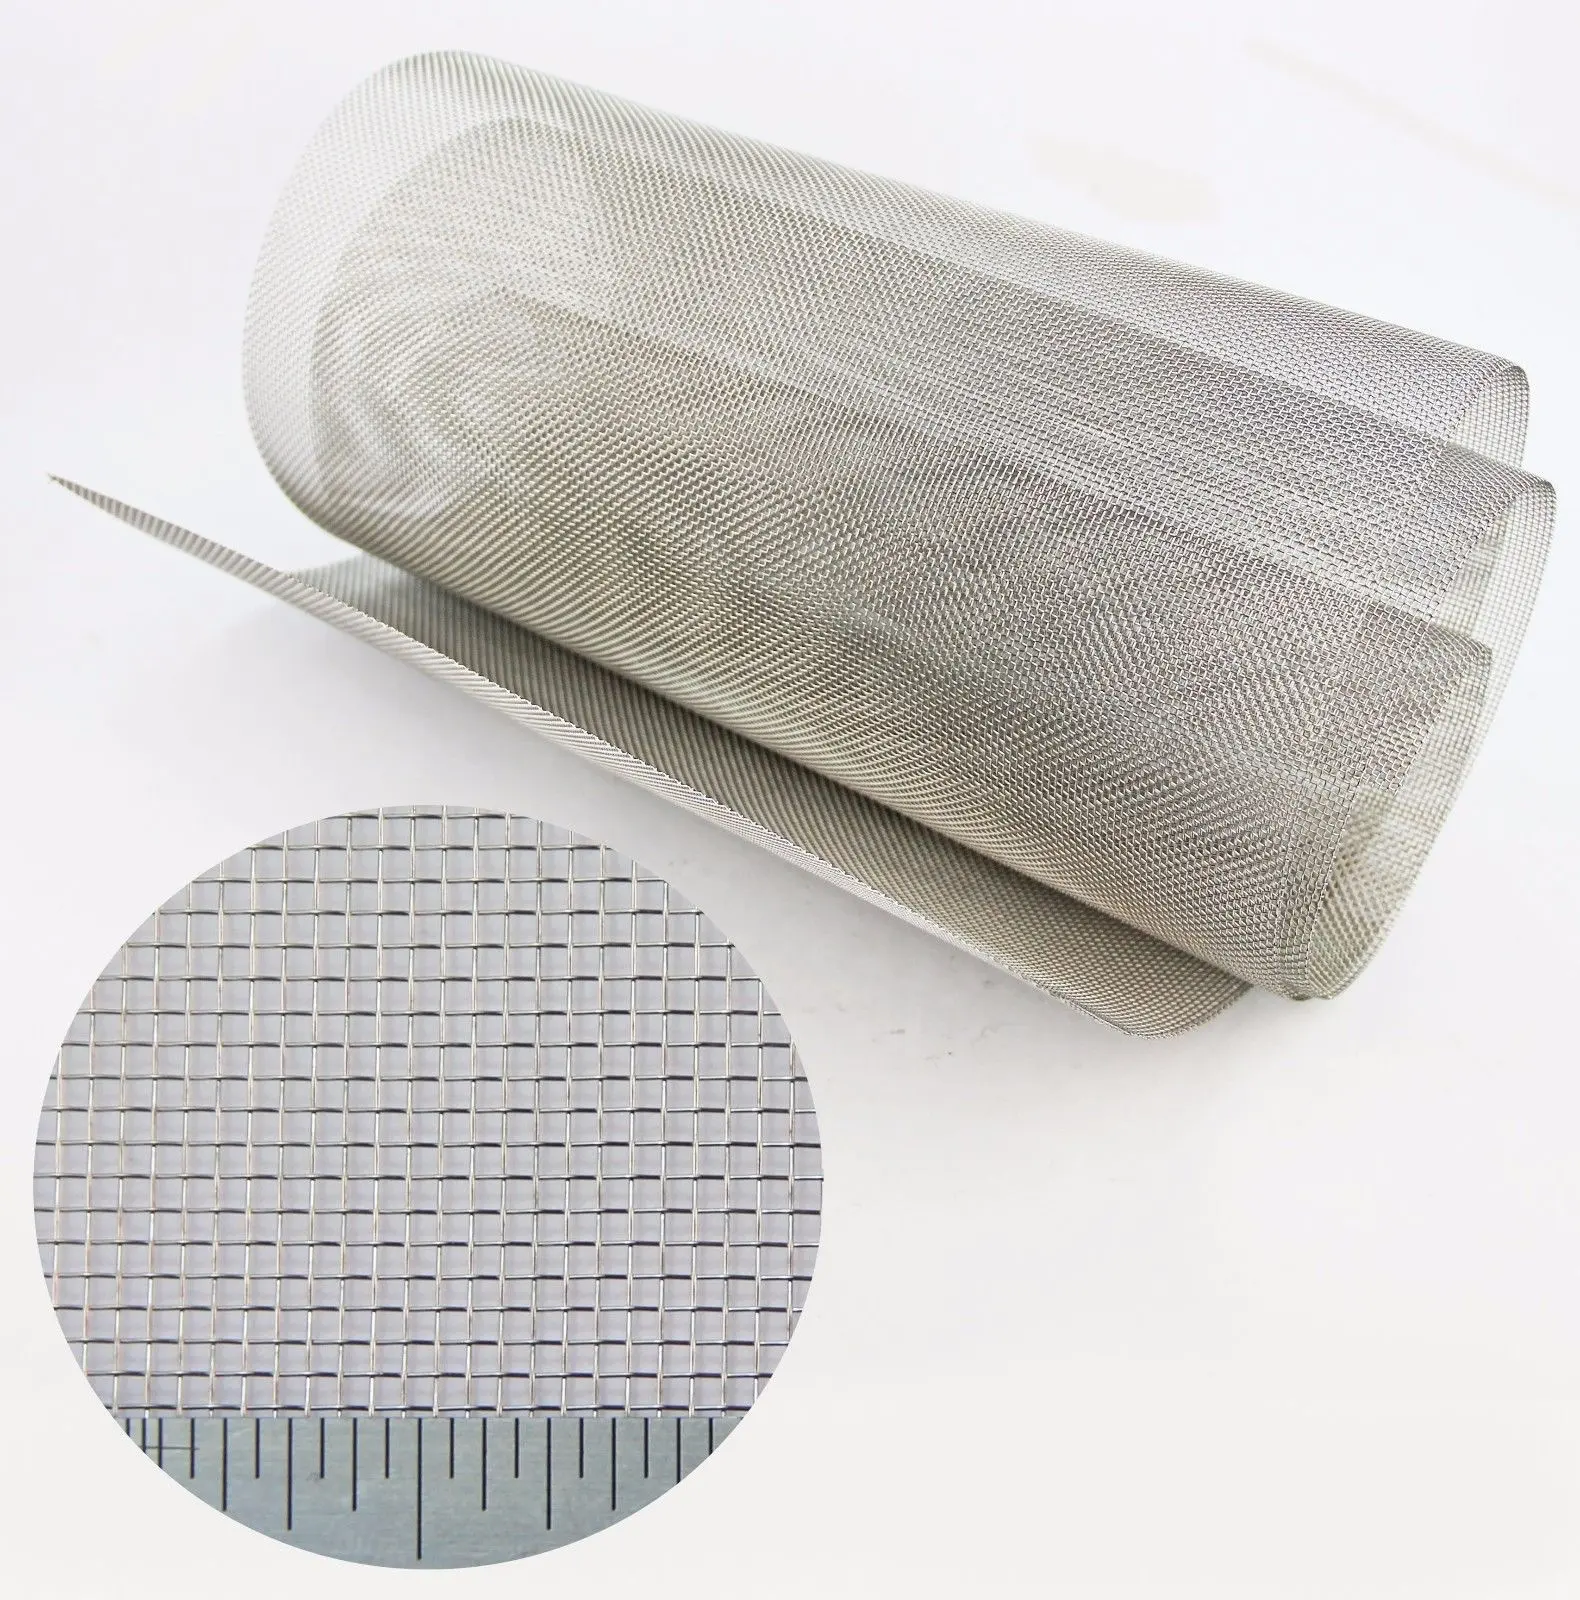 Support Sample Fine Mesh Opening Stainless Steel Metal Printing Wire Mesh For Screen Printer